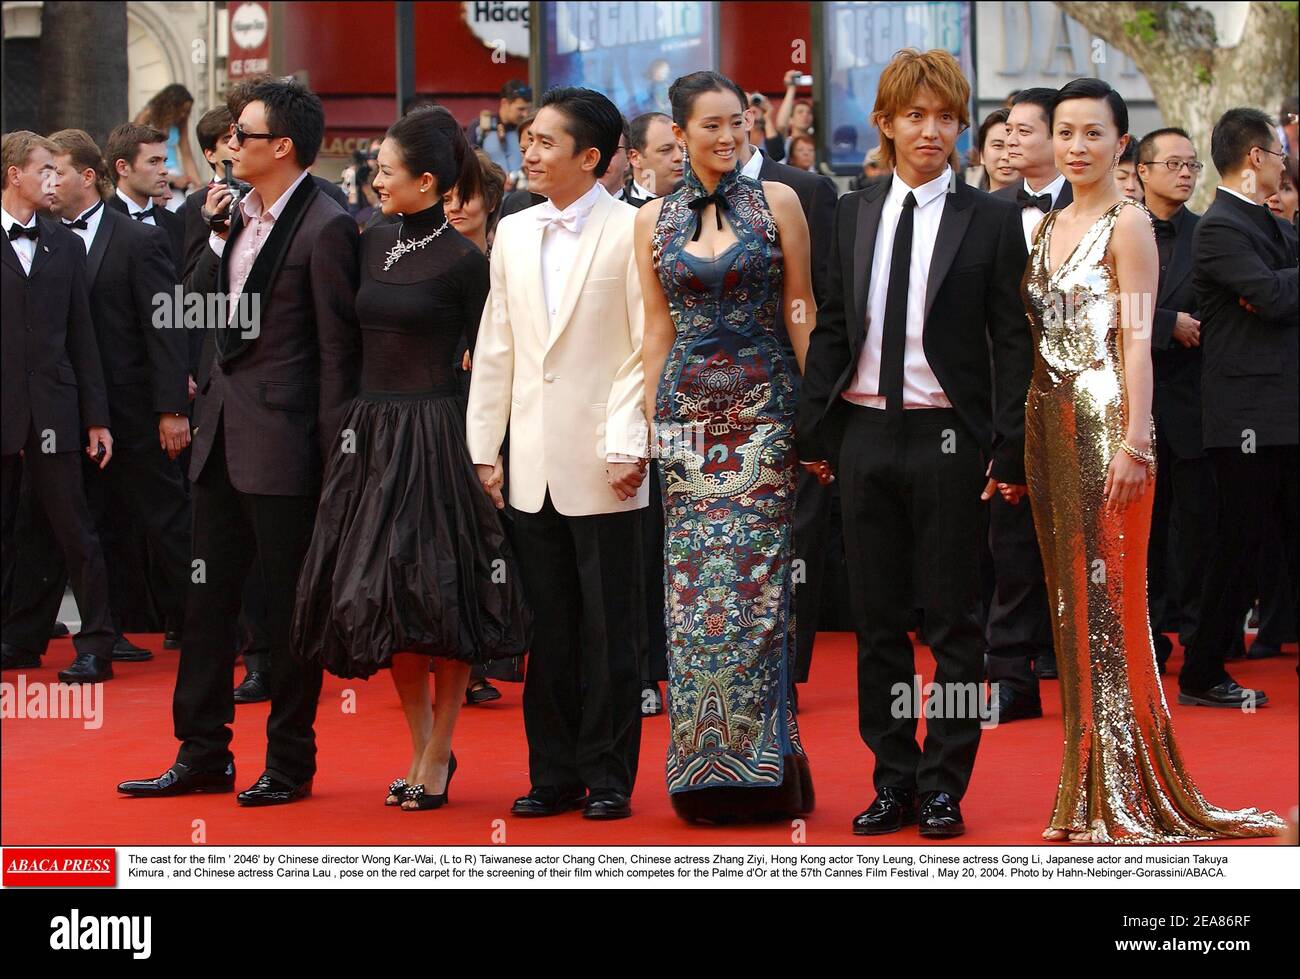 The cast for the film ' 2046' by Chinese director Wong Kar-Wai, (L to R) Taiwanese actor Chang Chen, Chinese actress Zhang Ziyi, Hong Kong actor Tony Leung, Chinese actress Gong Li, Japanese actor and musician Takuya Kimura , and Chinese actress Carina Lau , pose on the red carpet for the screening of their film which competes for the Palme d'Or at the 57th Cannes Film Festival , May 20, 2004. Photo by Hahn-Nebinger-Gorassini/ABACA. Stock Photo